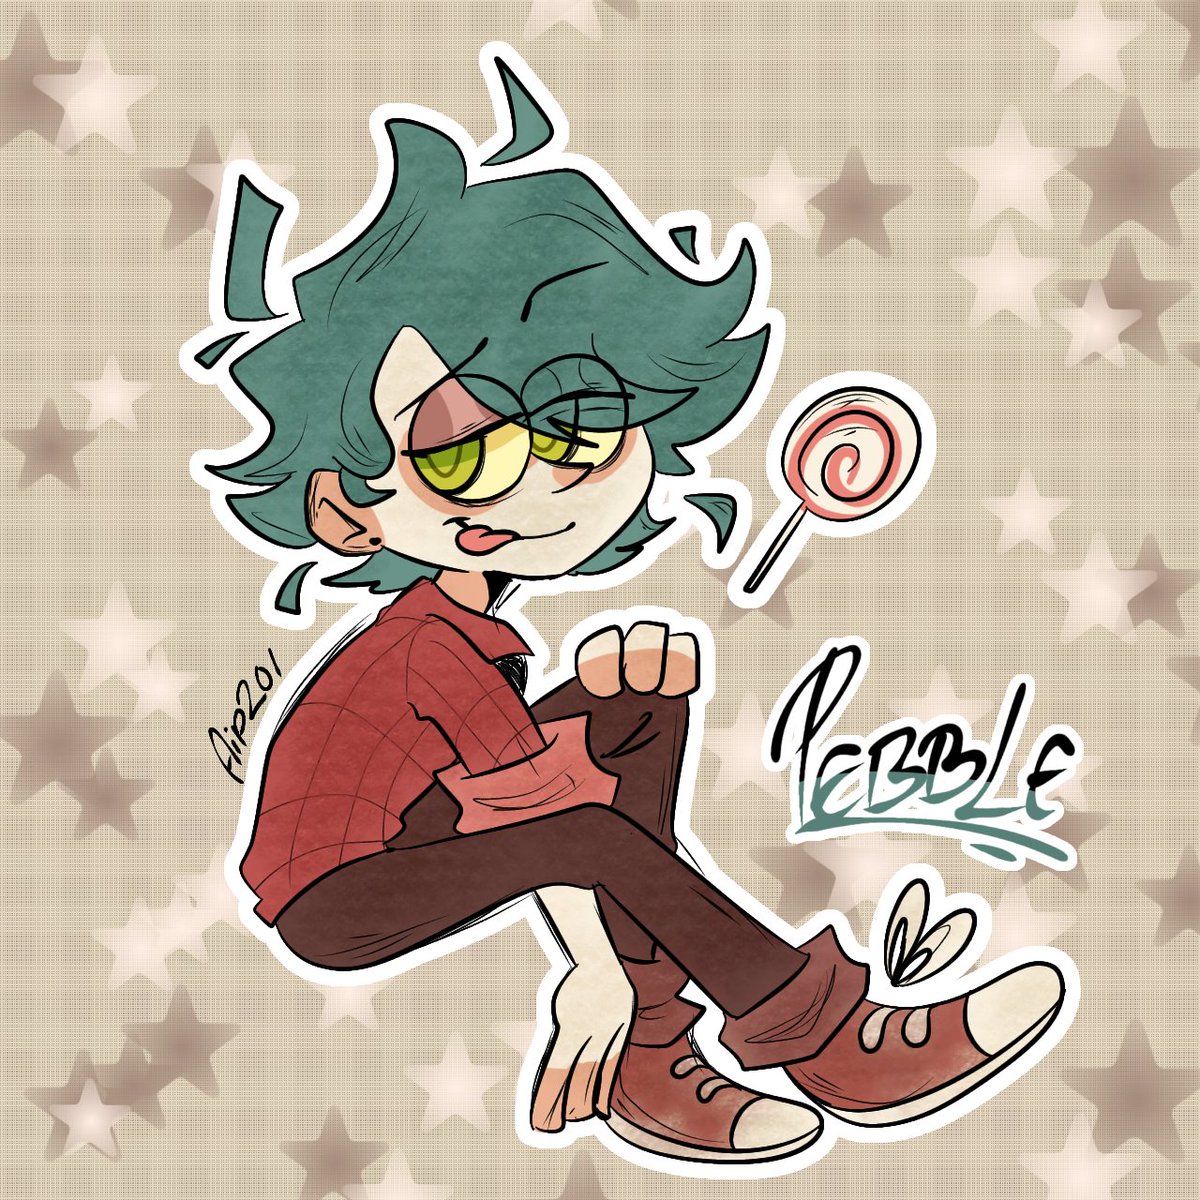 Pebble cause why not~
Got requested to drawing him, by @Darknessr1sings 
#ramshackle #ramshacklefanart